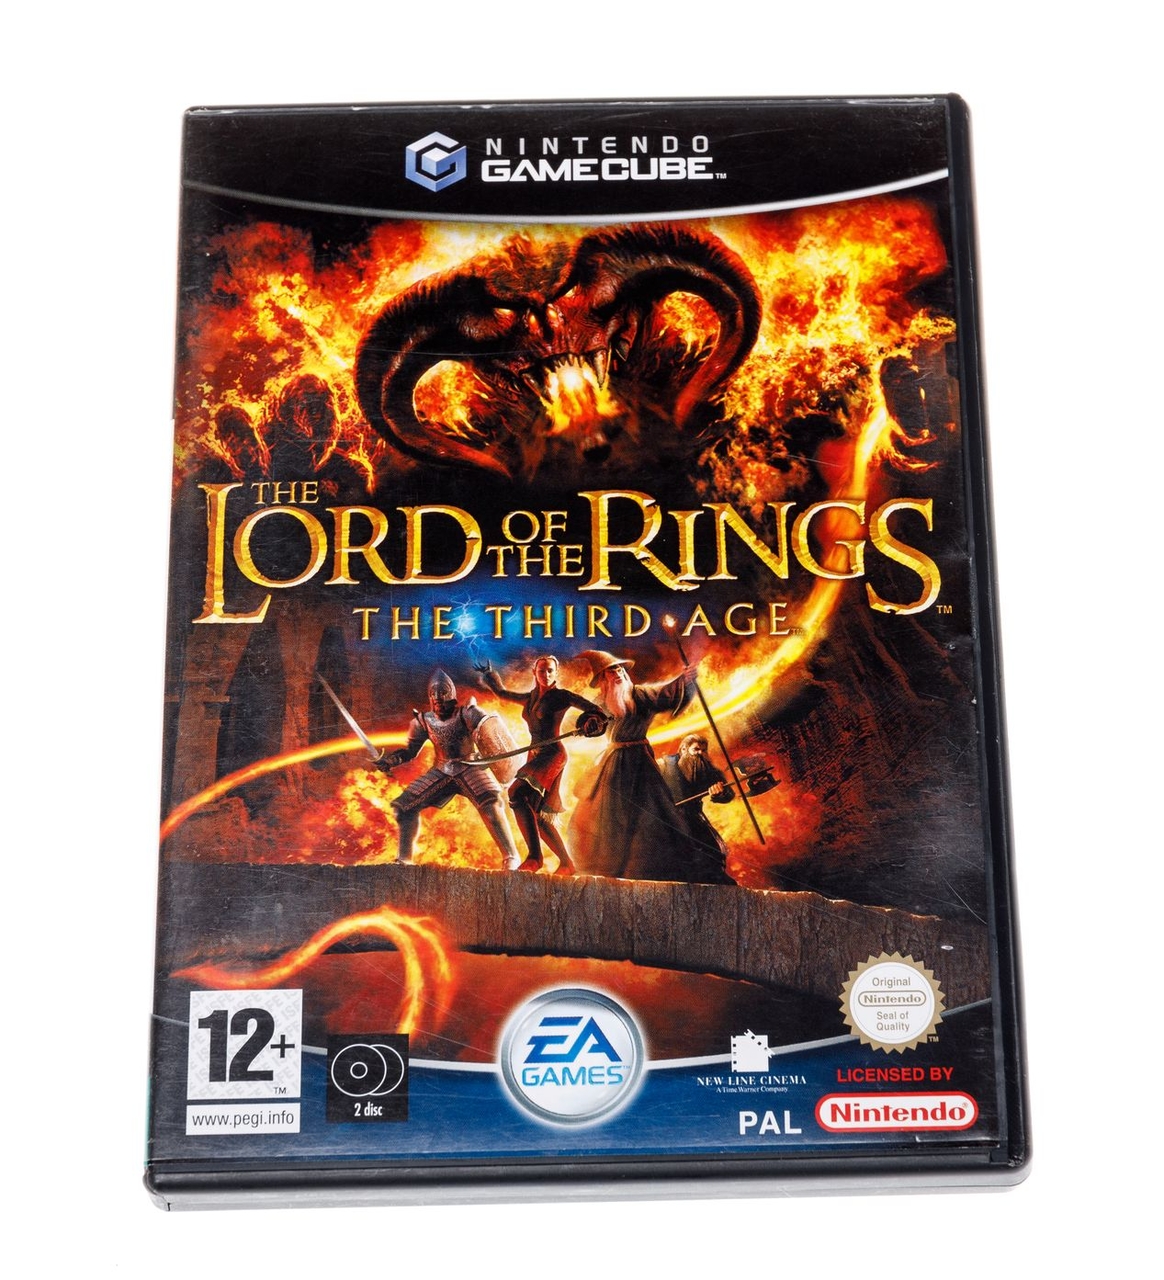 The Lord of the Rings: The Third Age | Gamecube Games | RetroNintendoKopen.nl